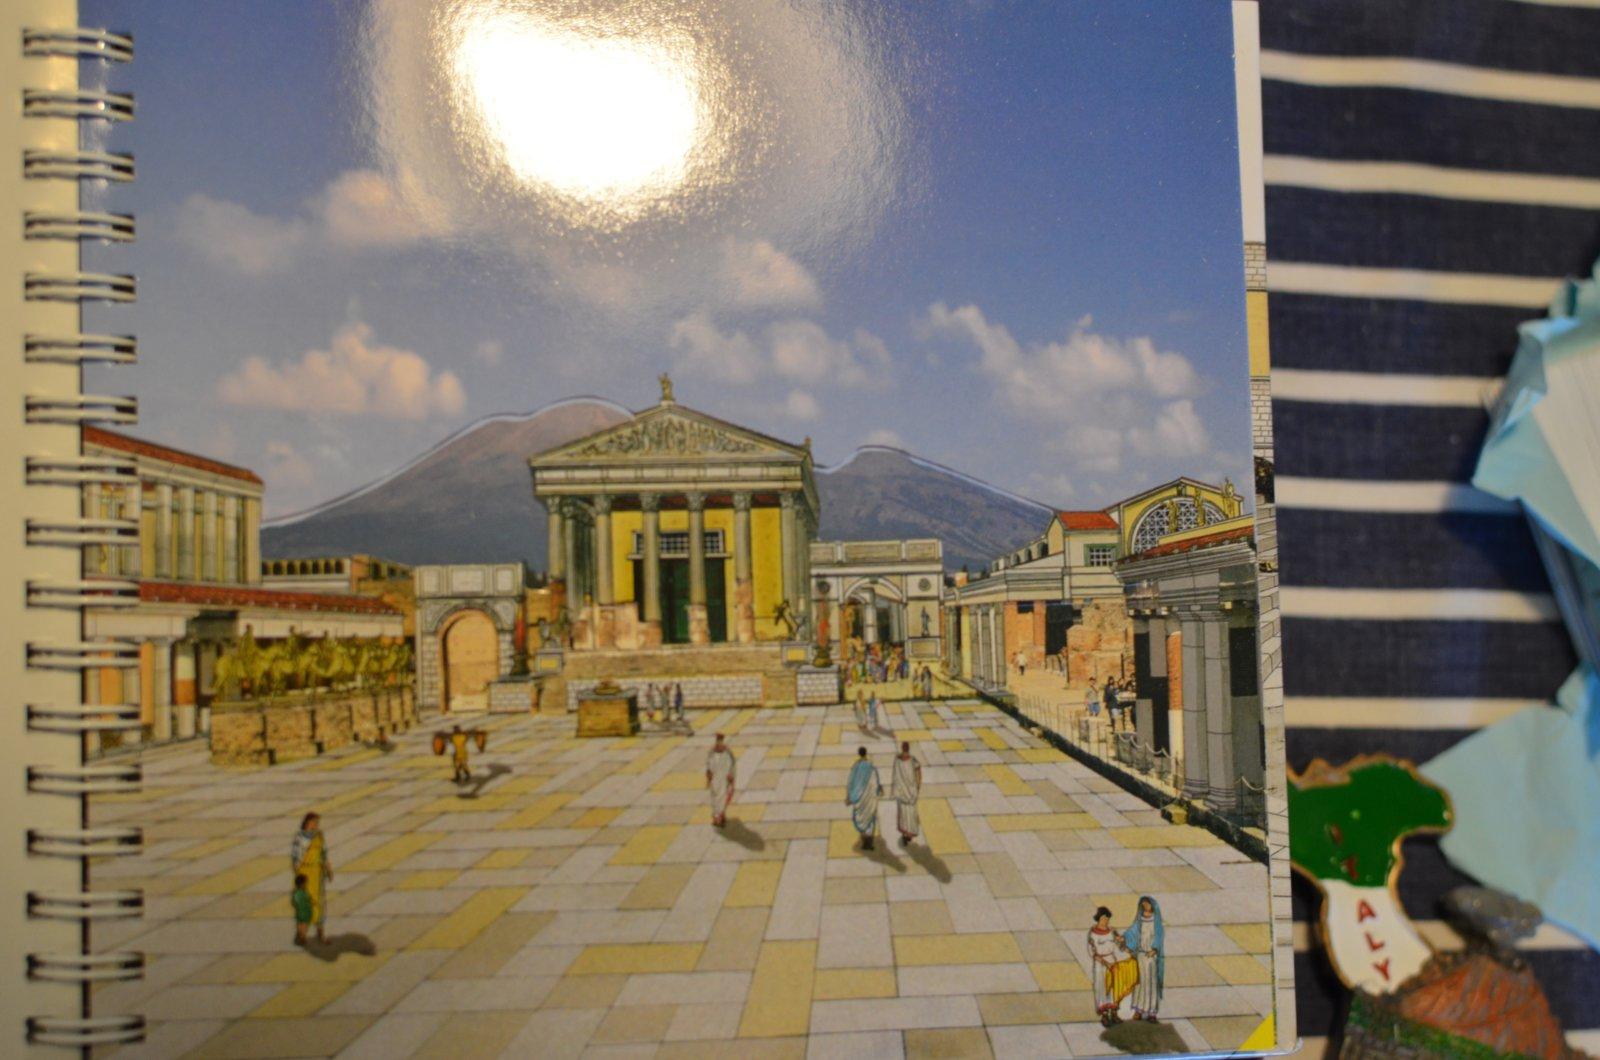 Pages from the book that show what Pompeii looked like before the eruption...